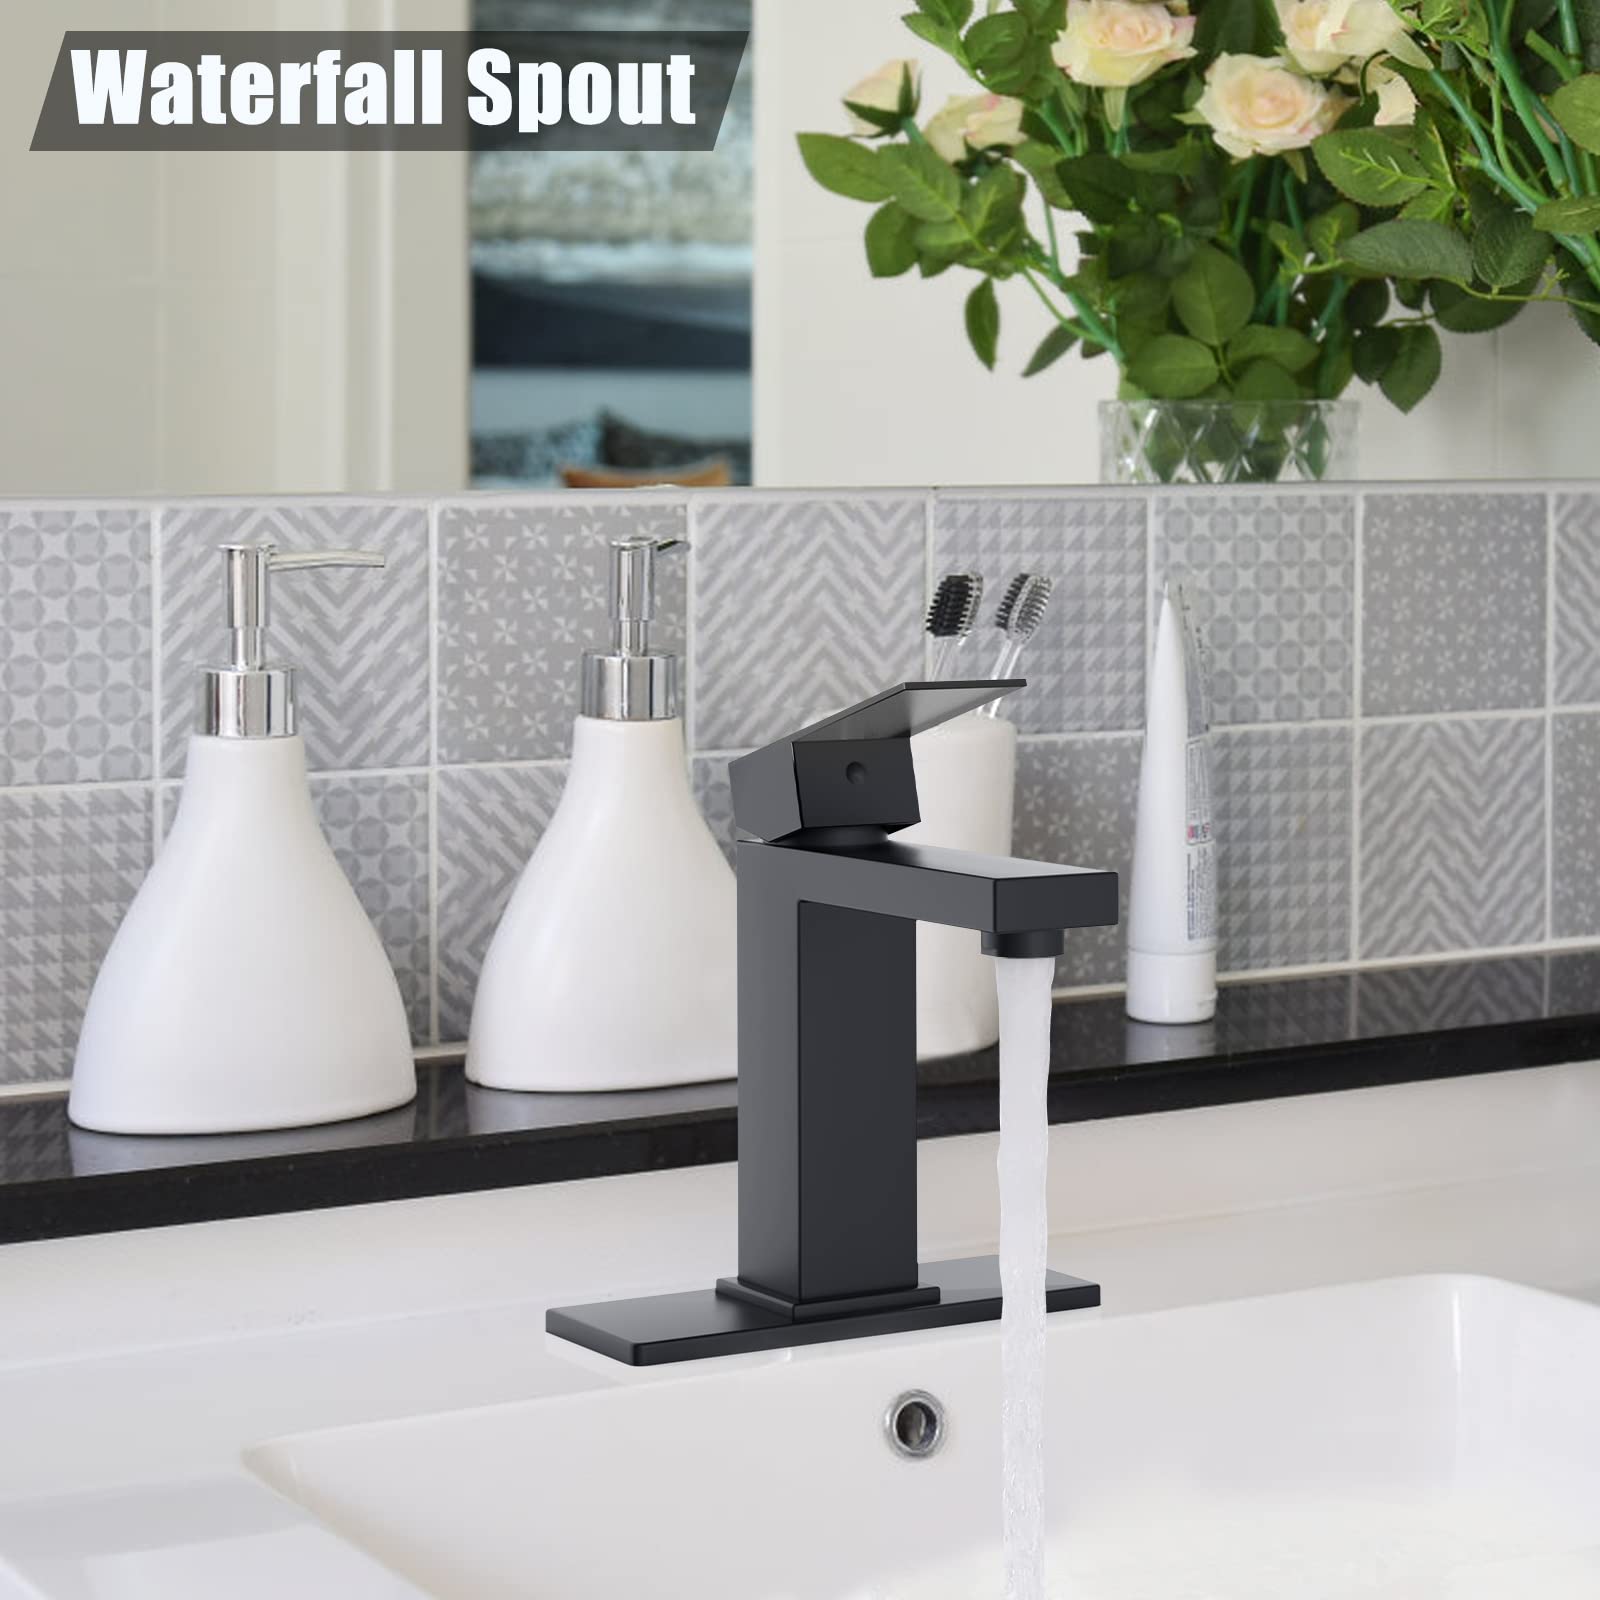 Bathroom Sink Faucet for 1 or 3 Holes with Pop Up Drain Stopper & Water Supply Hoses No-Lead Modern Single Handle Bathroom Faucet (Deck Plate Included)